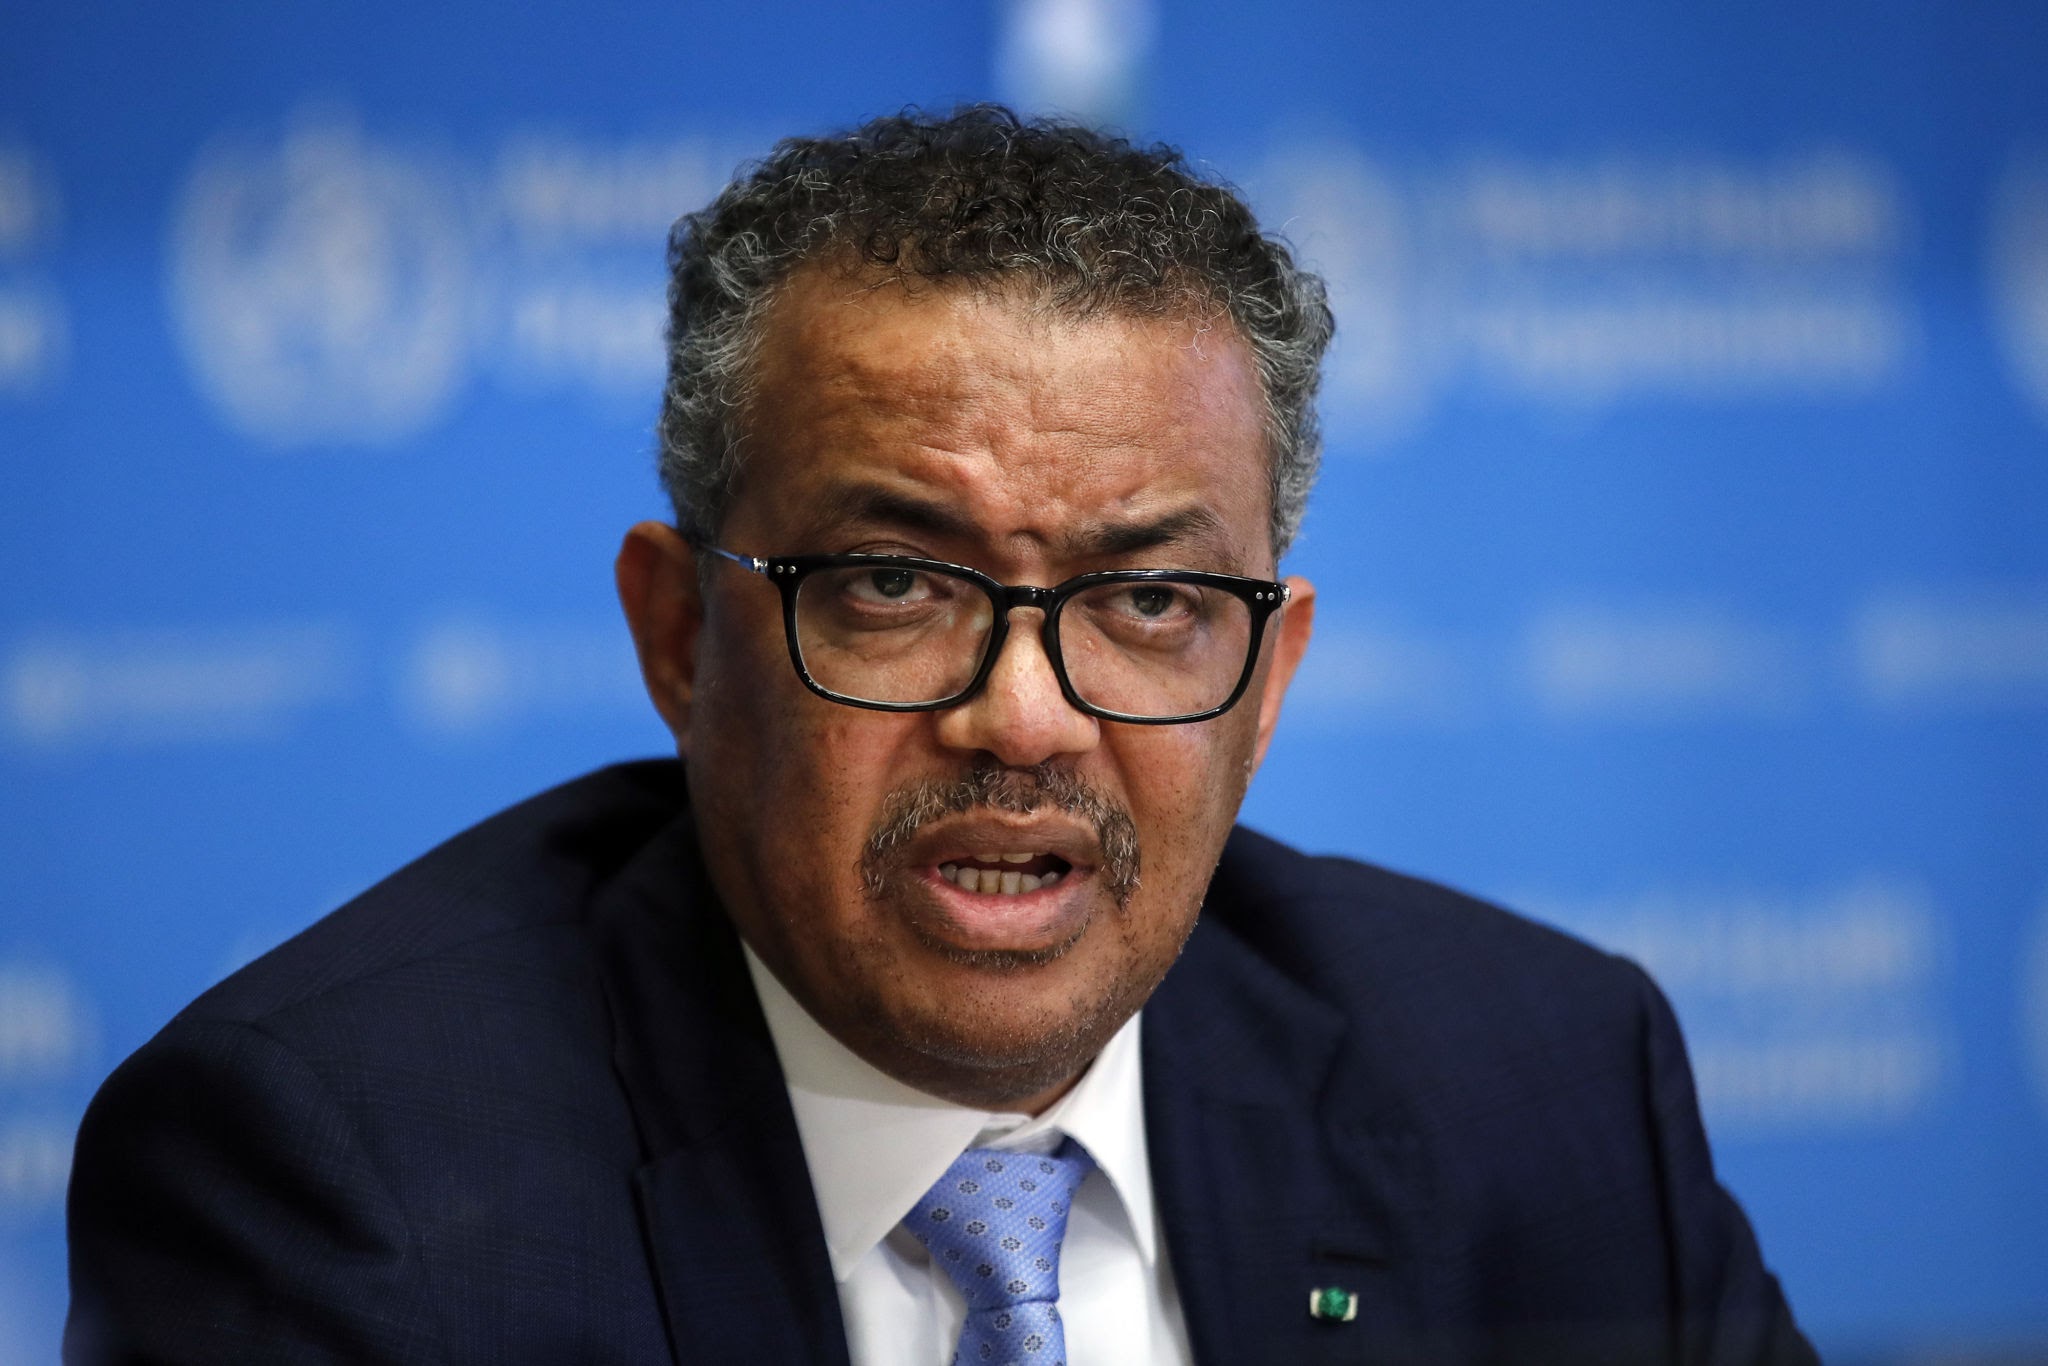 Tedros Adhanom Ghebreyesus, director general of the World Health Organization (WHO), speaks during a news conference on the COVID-19 coronavirus outbreak in Geneva, Switzerland, on Monday, March 2, 2020. More than $1.1 trillion was wiped off the value of developing-nation stocks and bonds last week as the economic impact of the coronavirus worsened. Photographer: Stefan Wermuth/Bloomberg via Getty Images